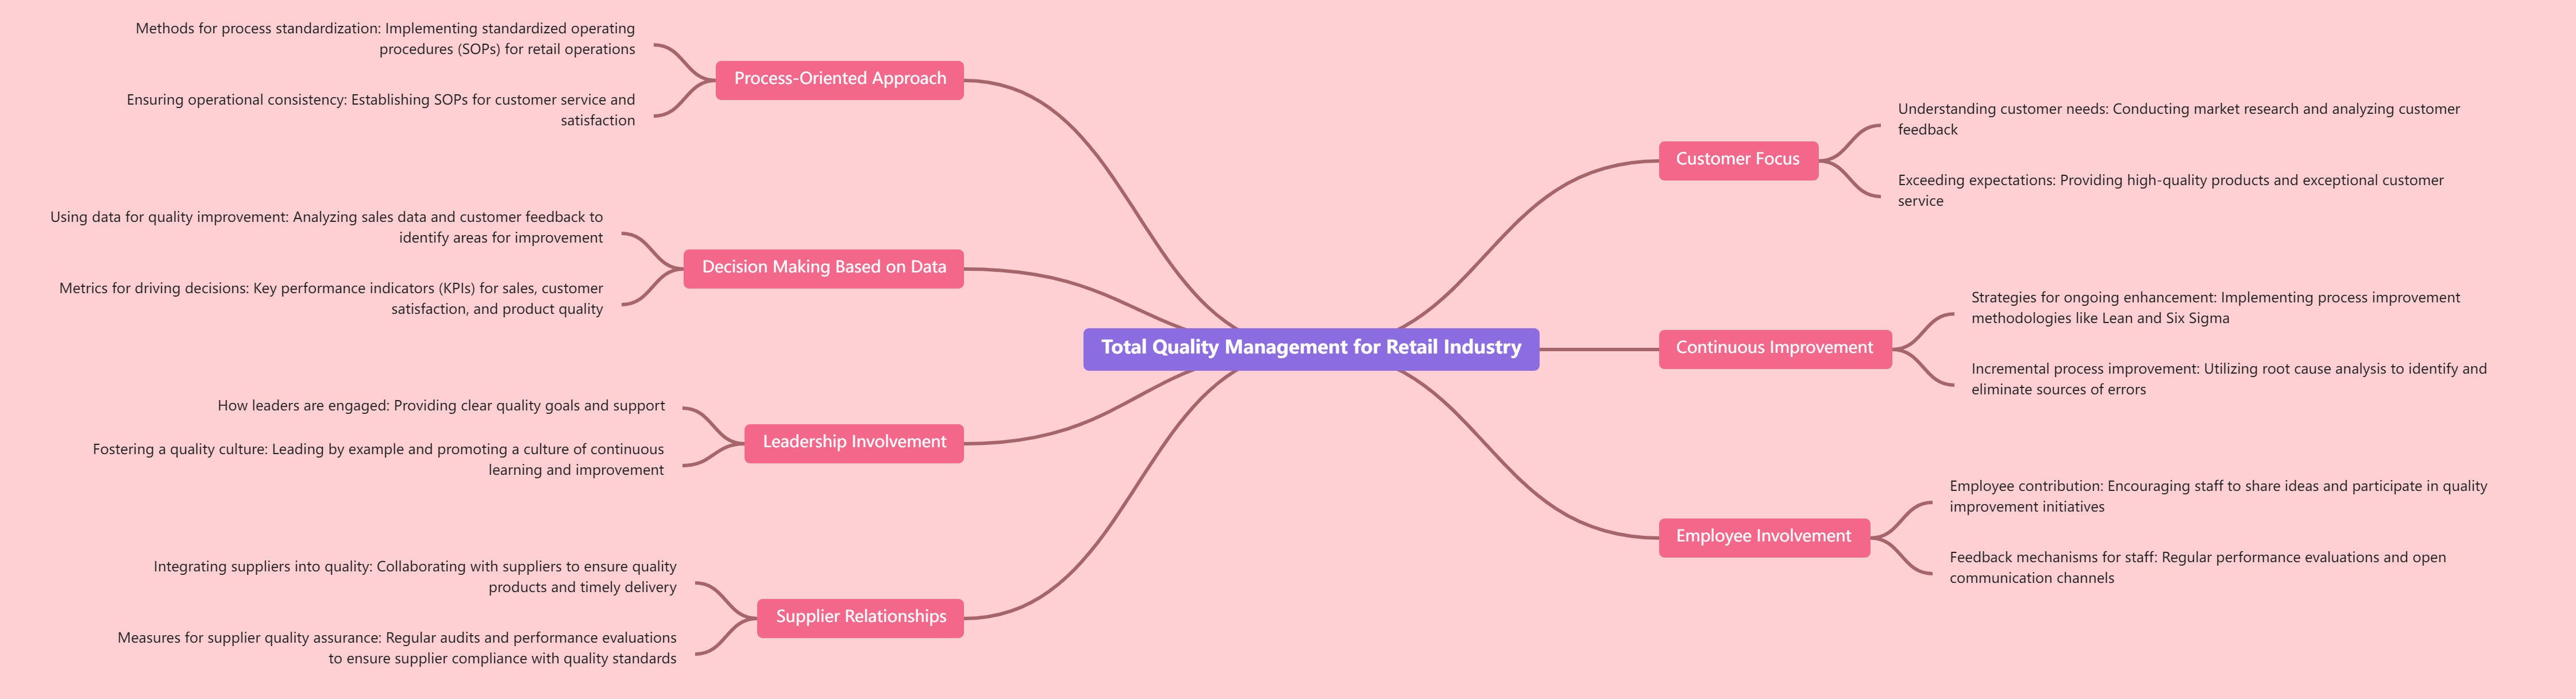 Total Quality Management For Retail Industry 